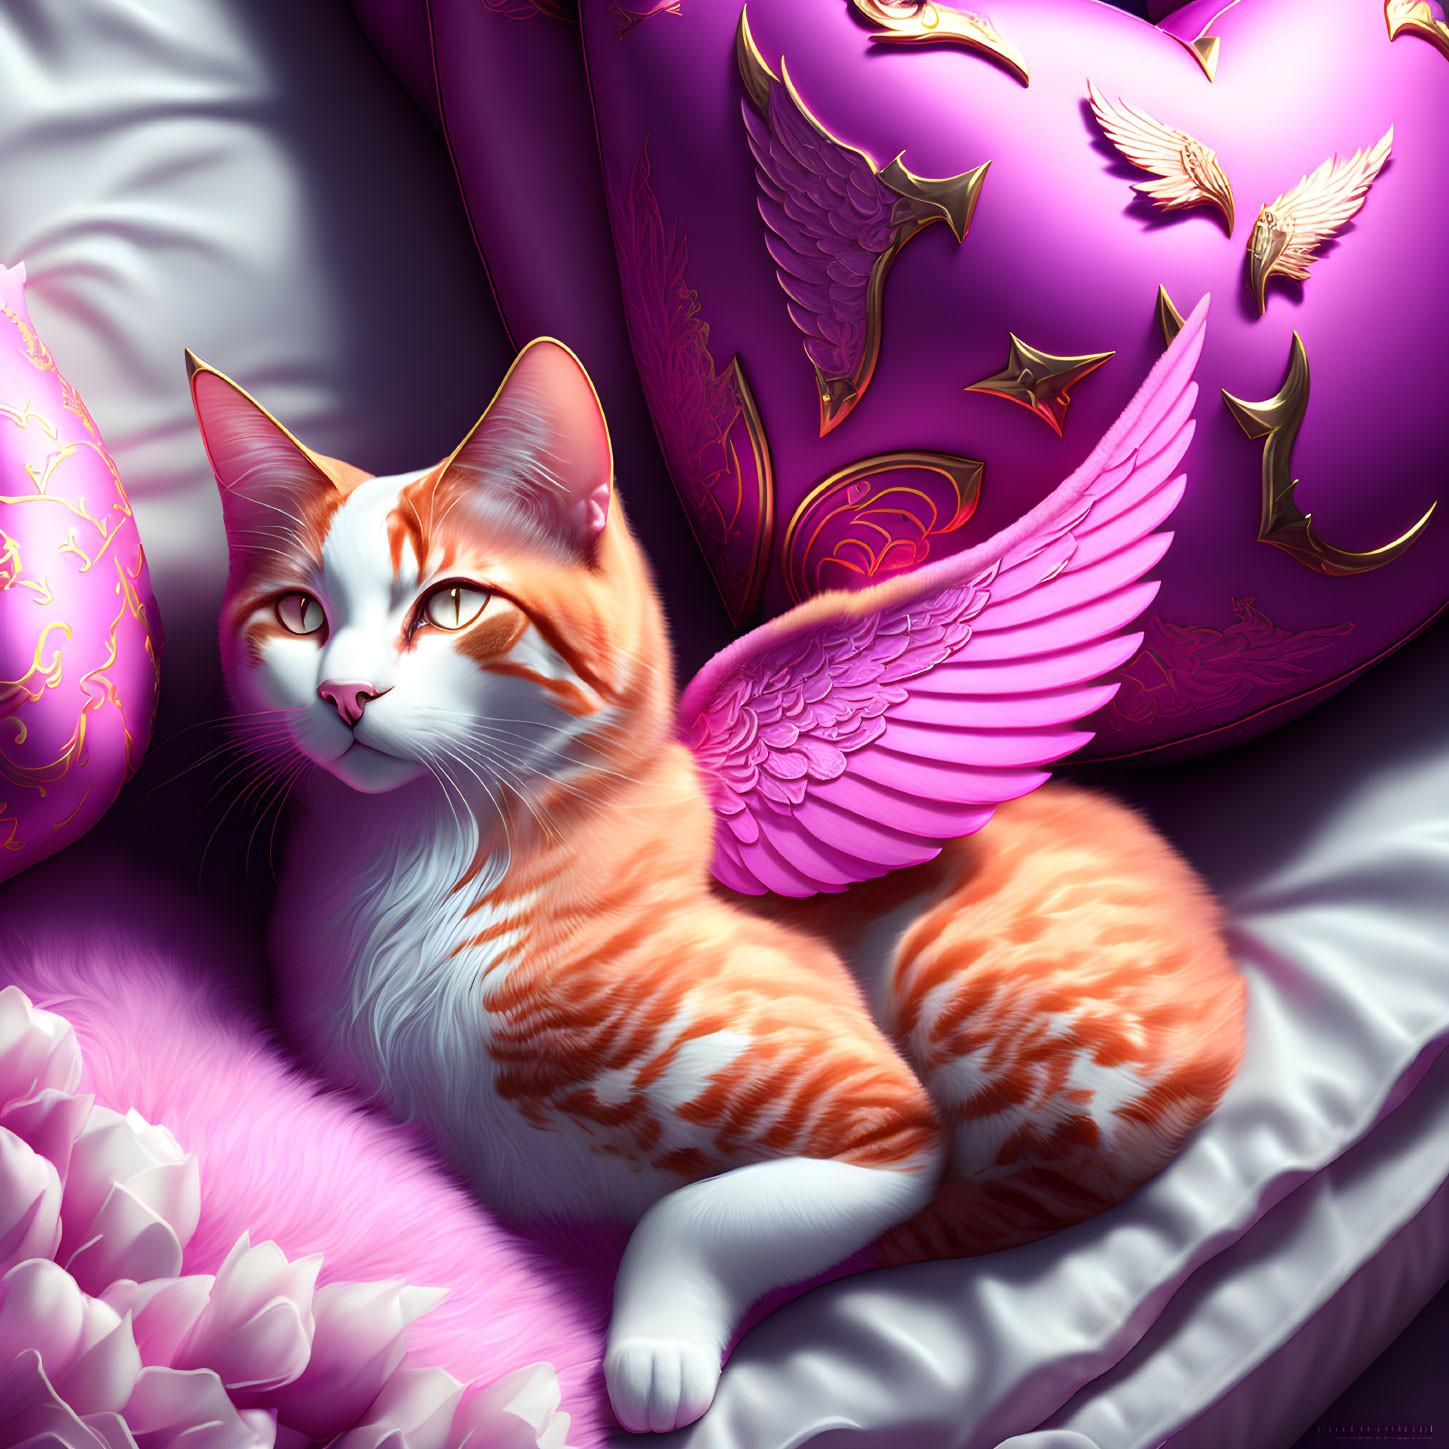 Orange and White Cat with Pink Wings on Purple and Pink Bed with Golden Bird Decorations